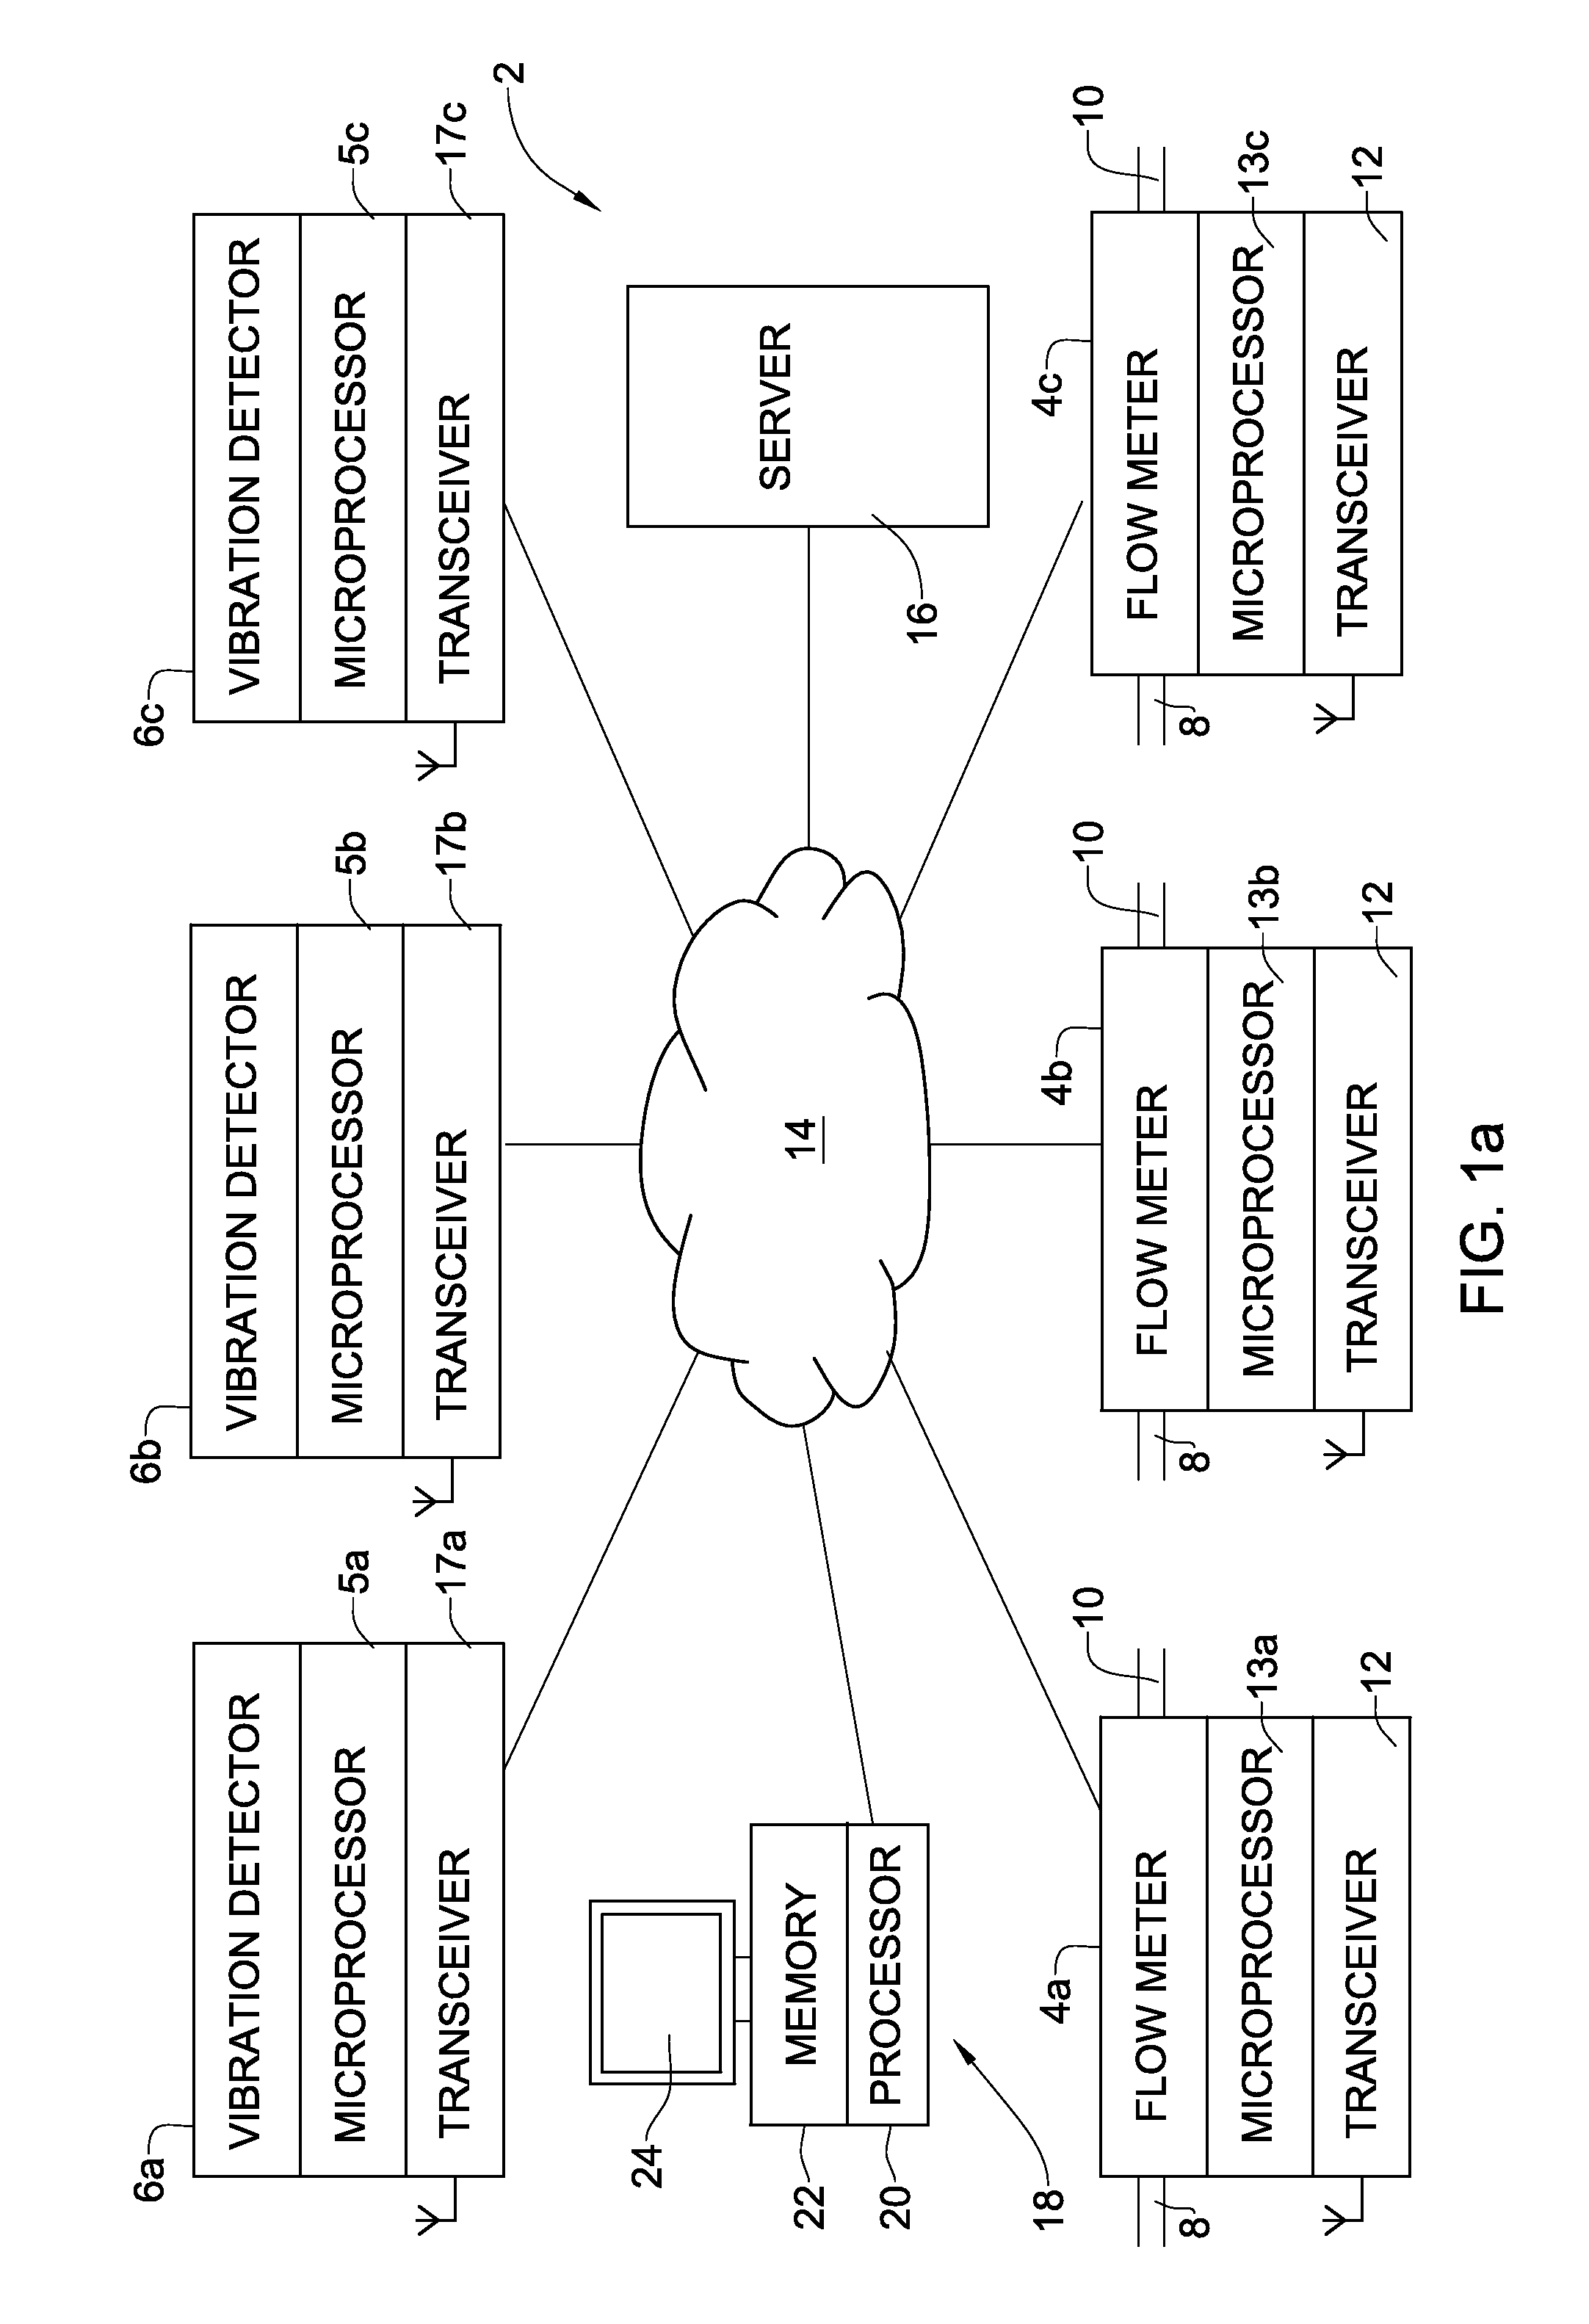 System method and device for leak detection and localization in a pipe network